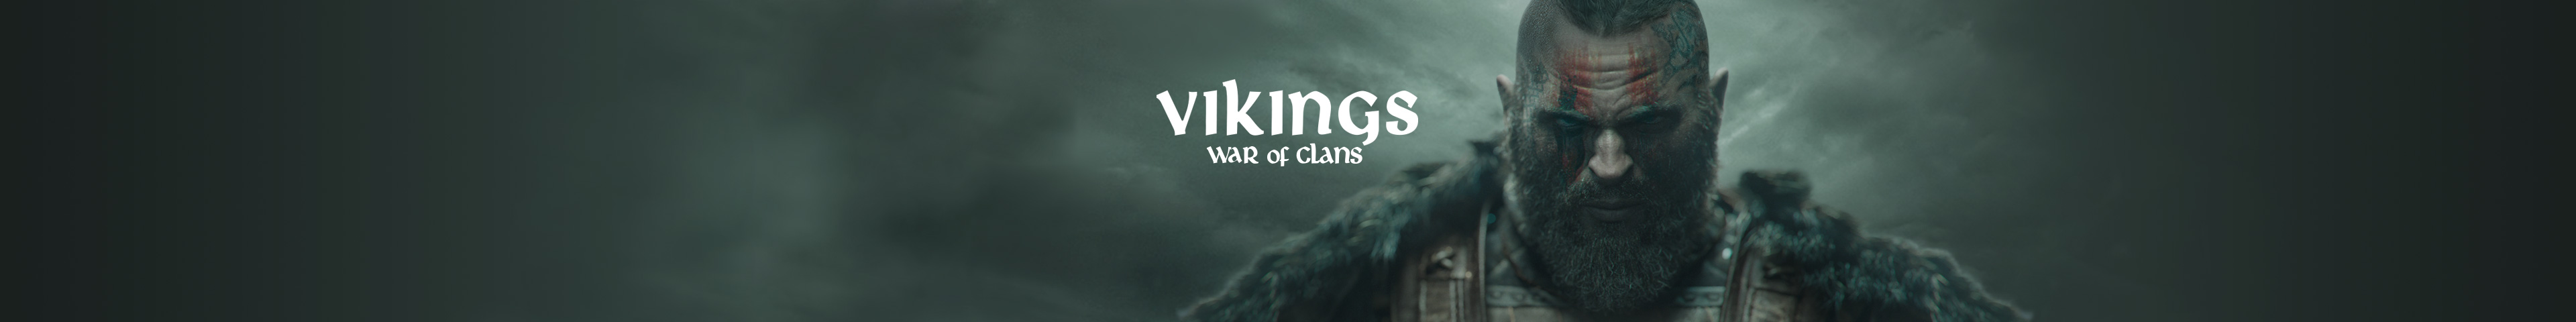 Vikings: War of Clans Tutorial - Competitions